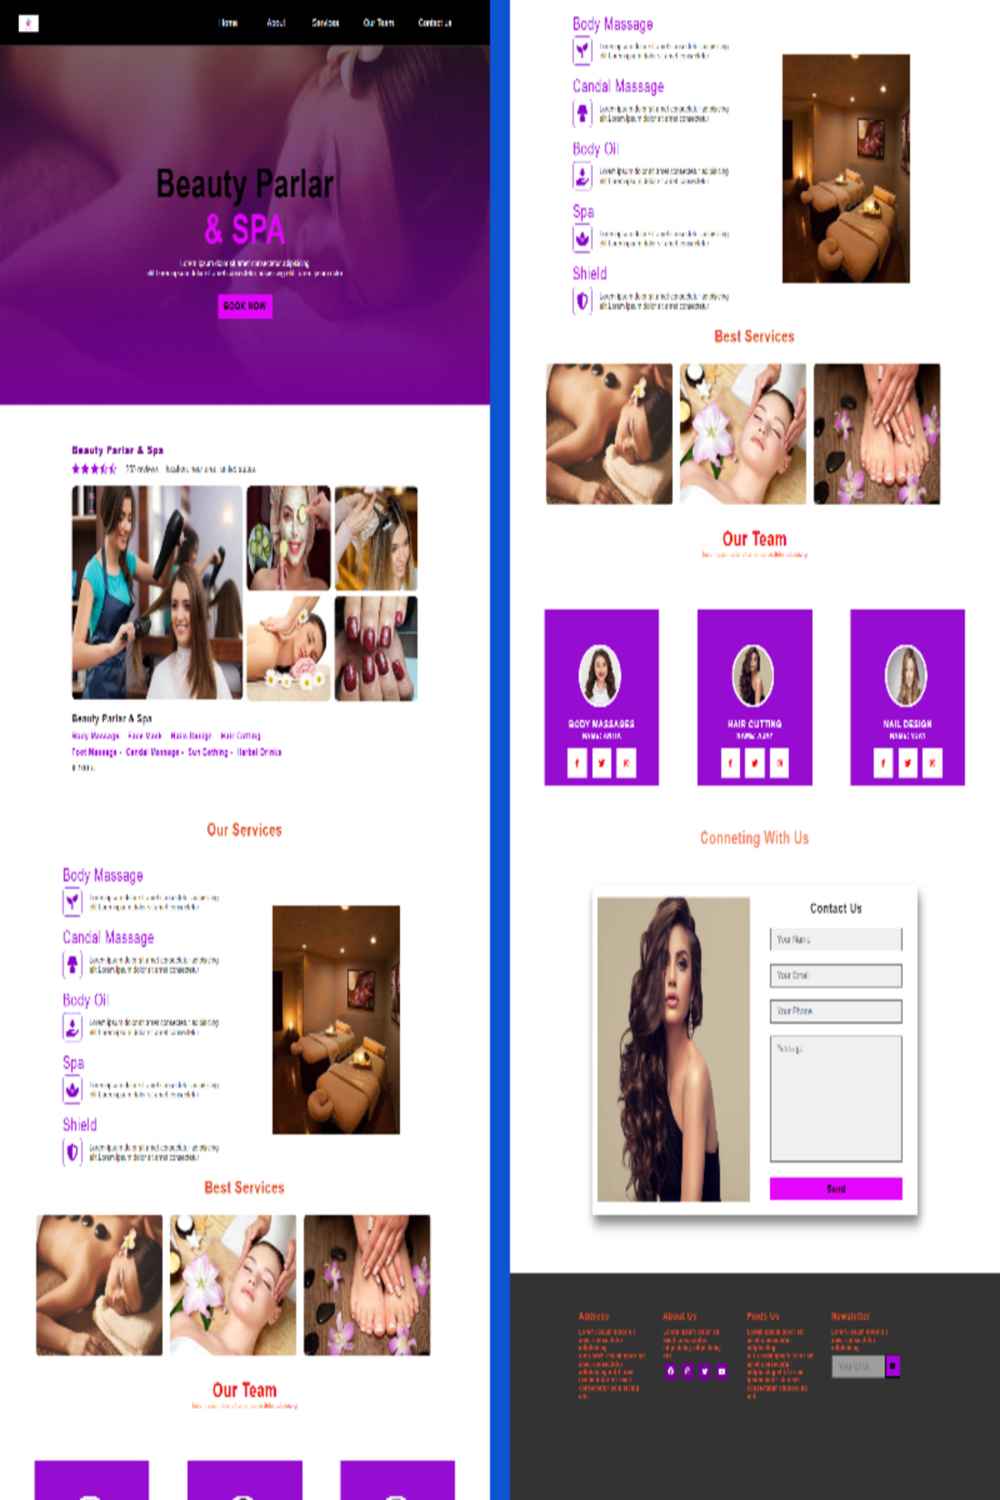 Beauty parlor And Spa - website design template in bootstrap 5 html css pinterest preview image.